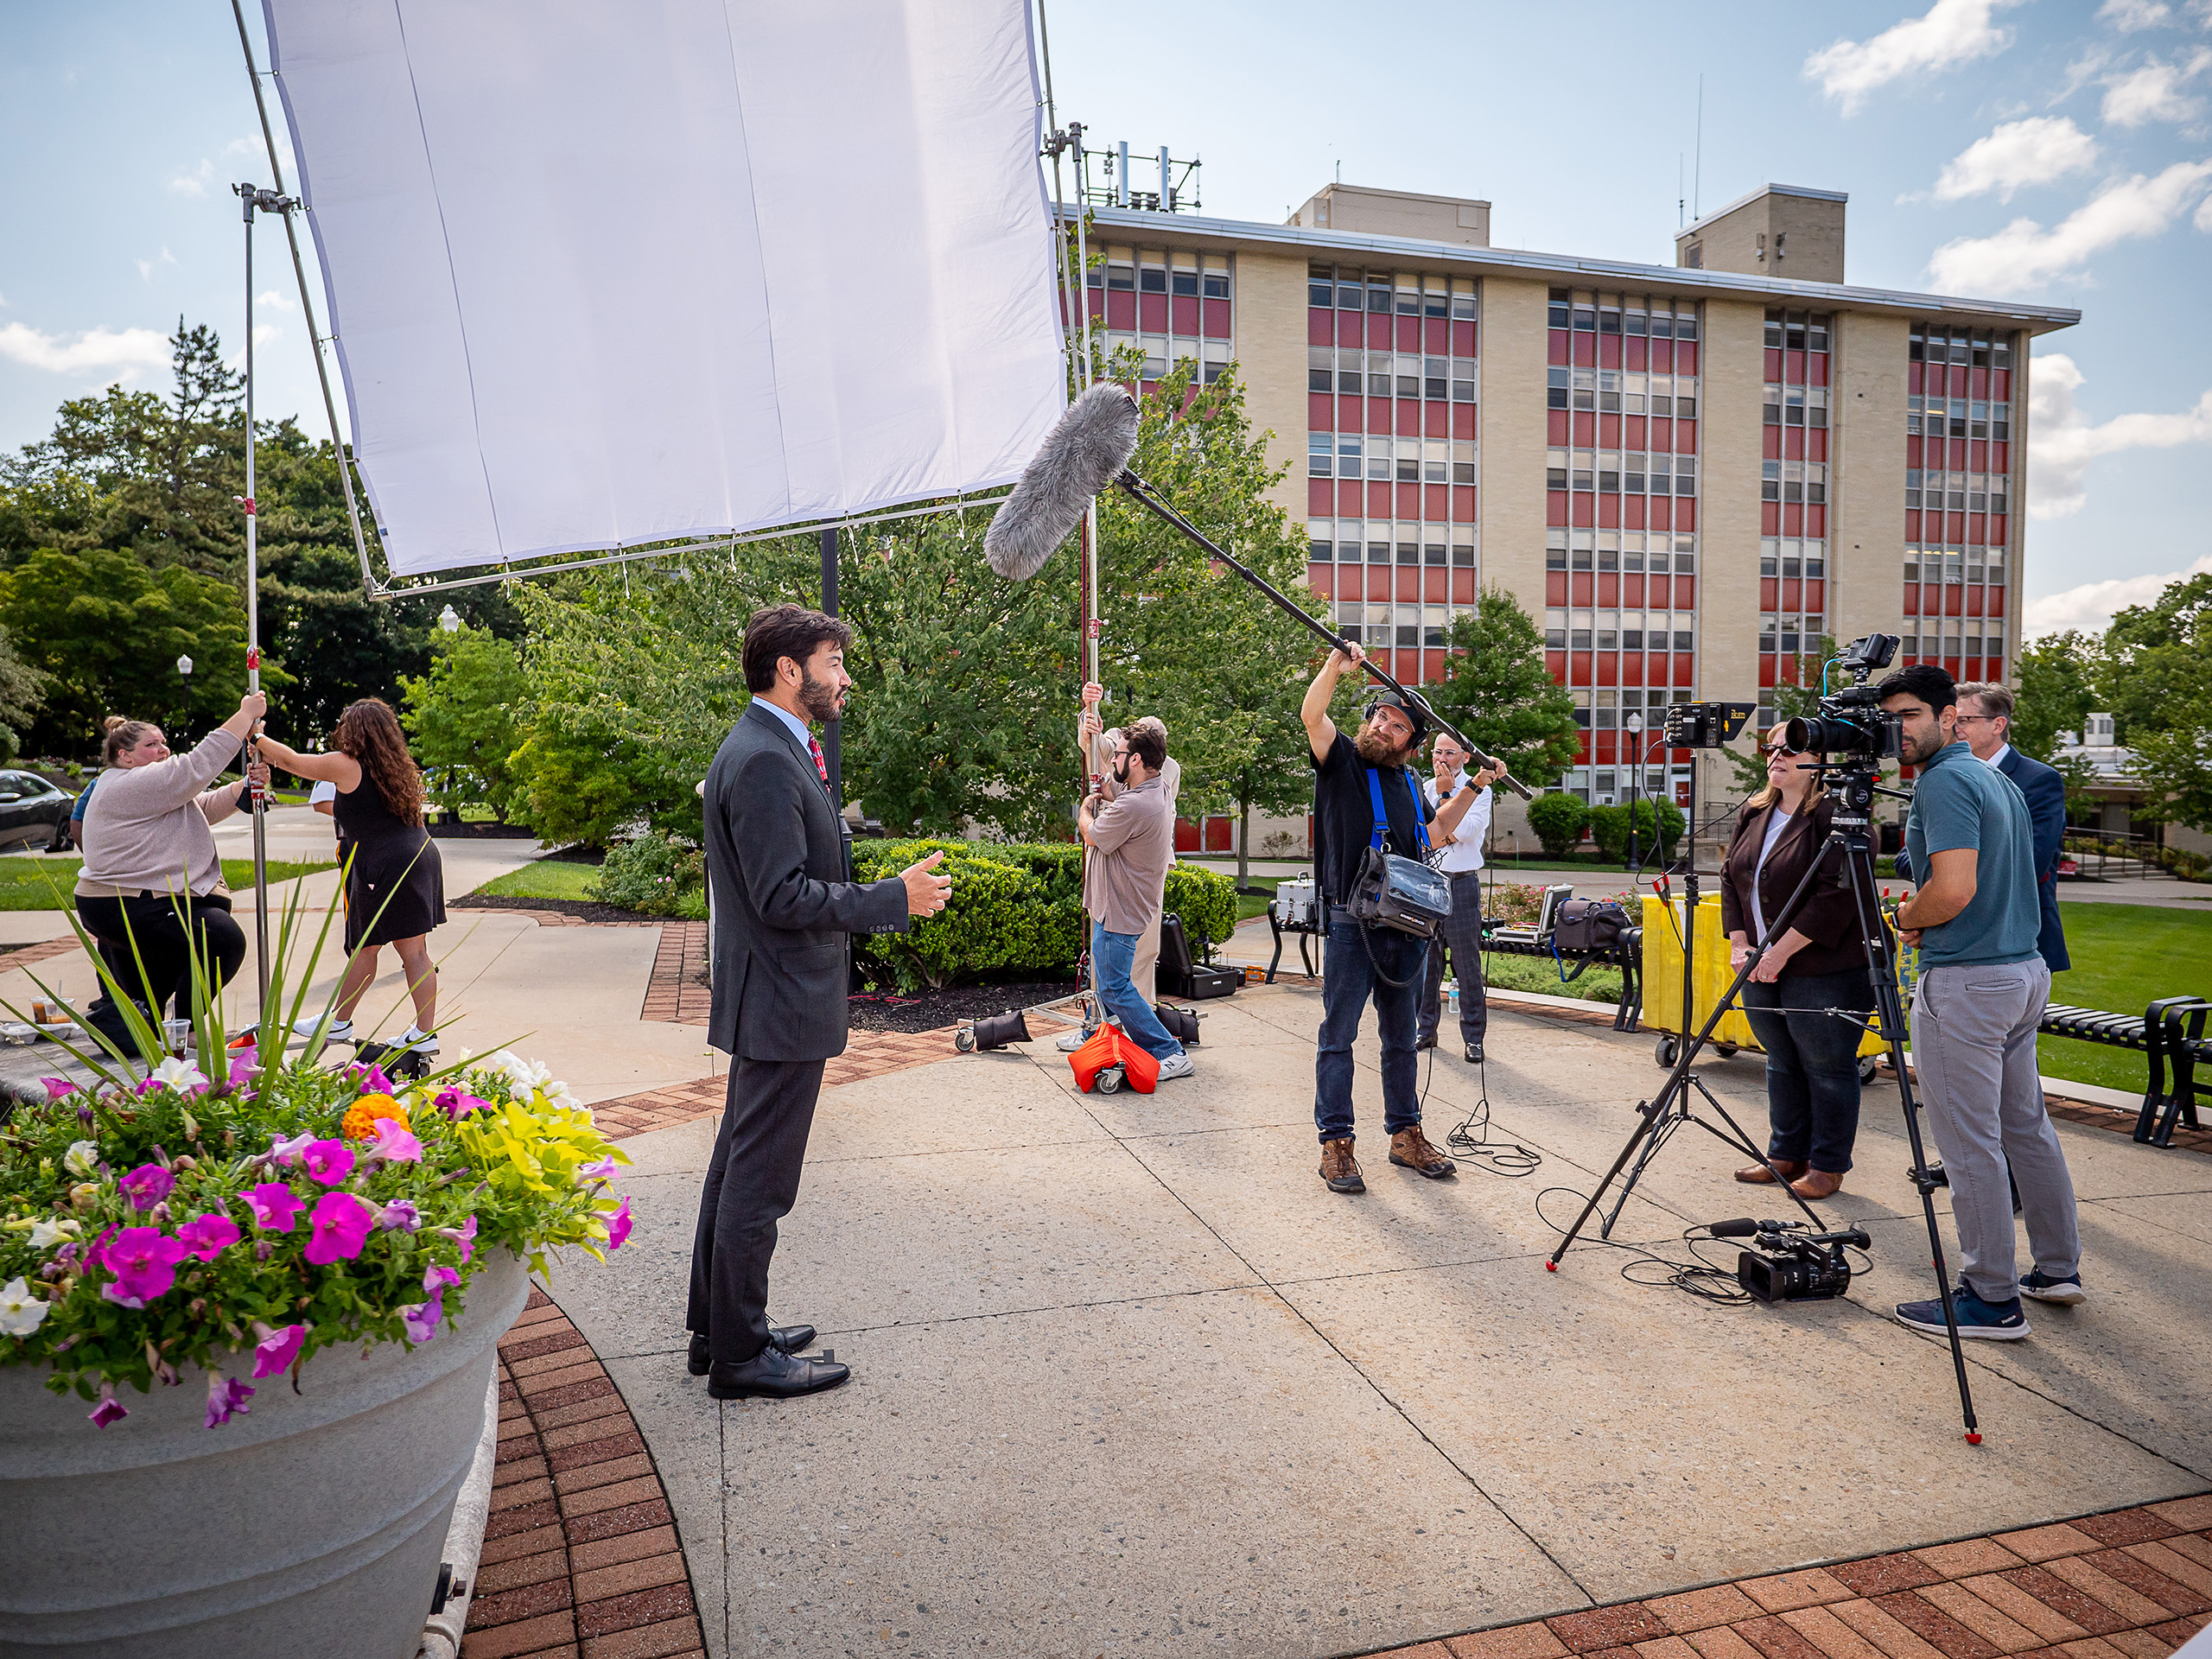 President Koppell filming on campus